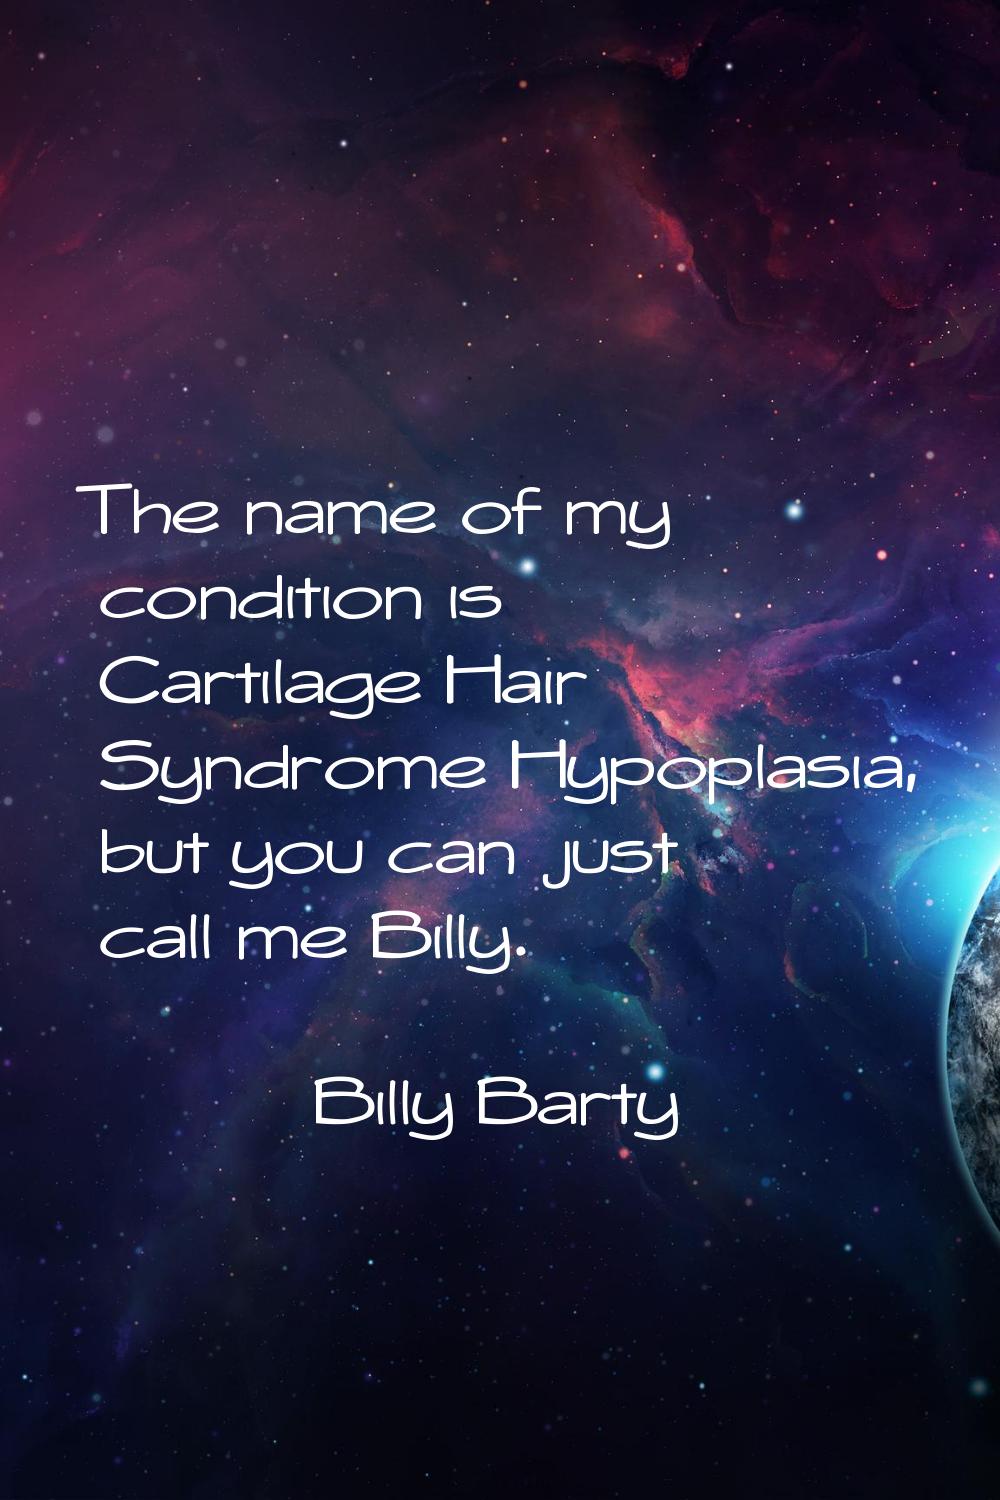 The name of my condition is Cartilage Hair Syndrome Hypoplasia, but you can just call me Billy.